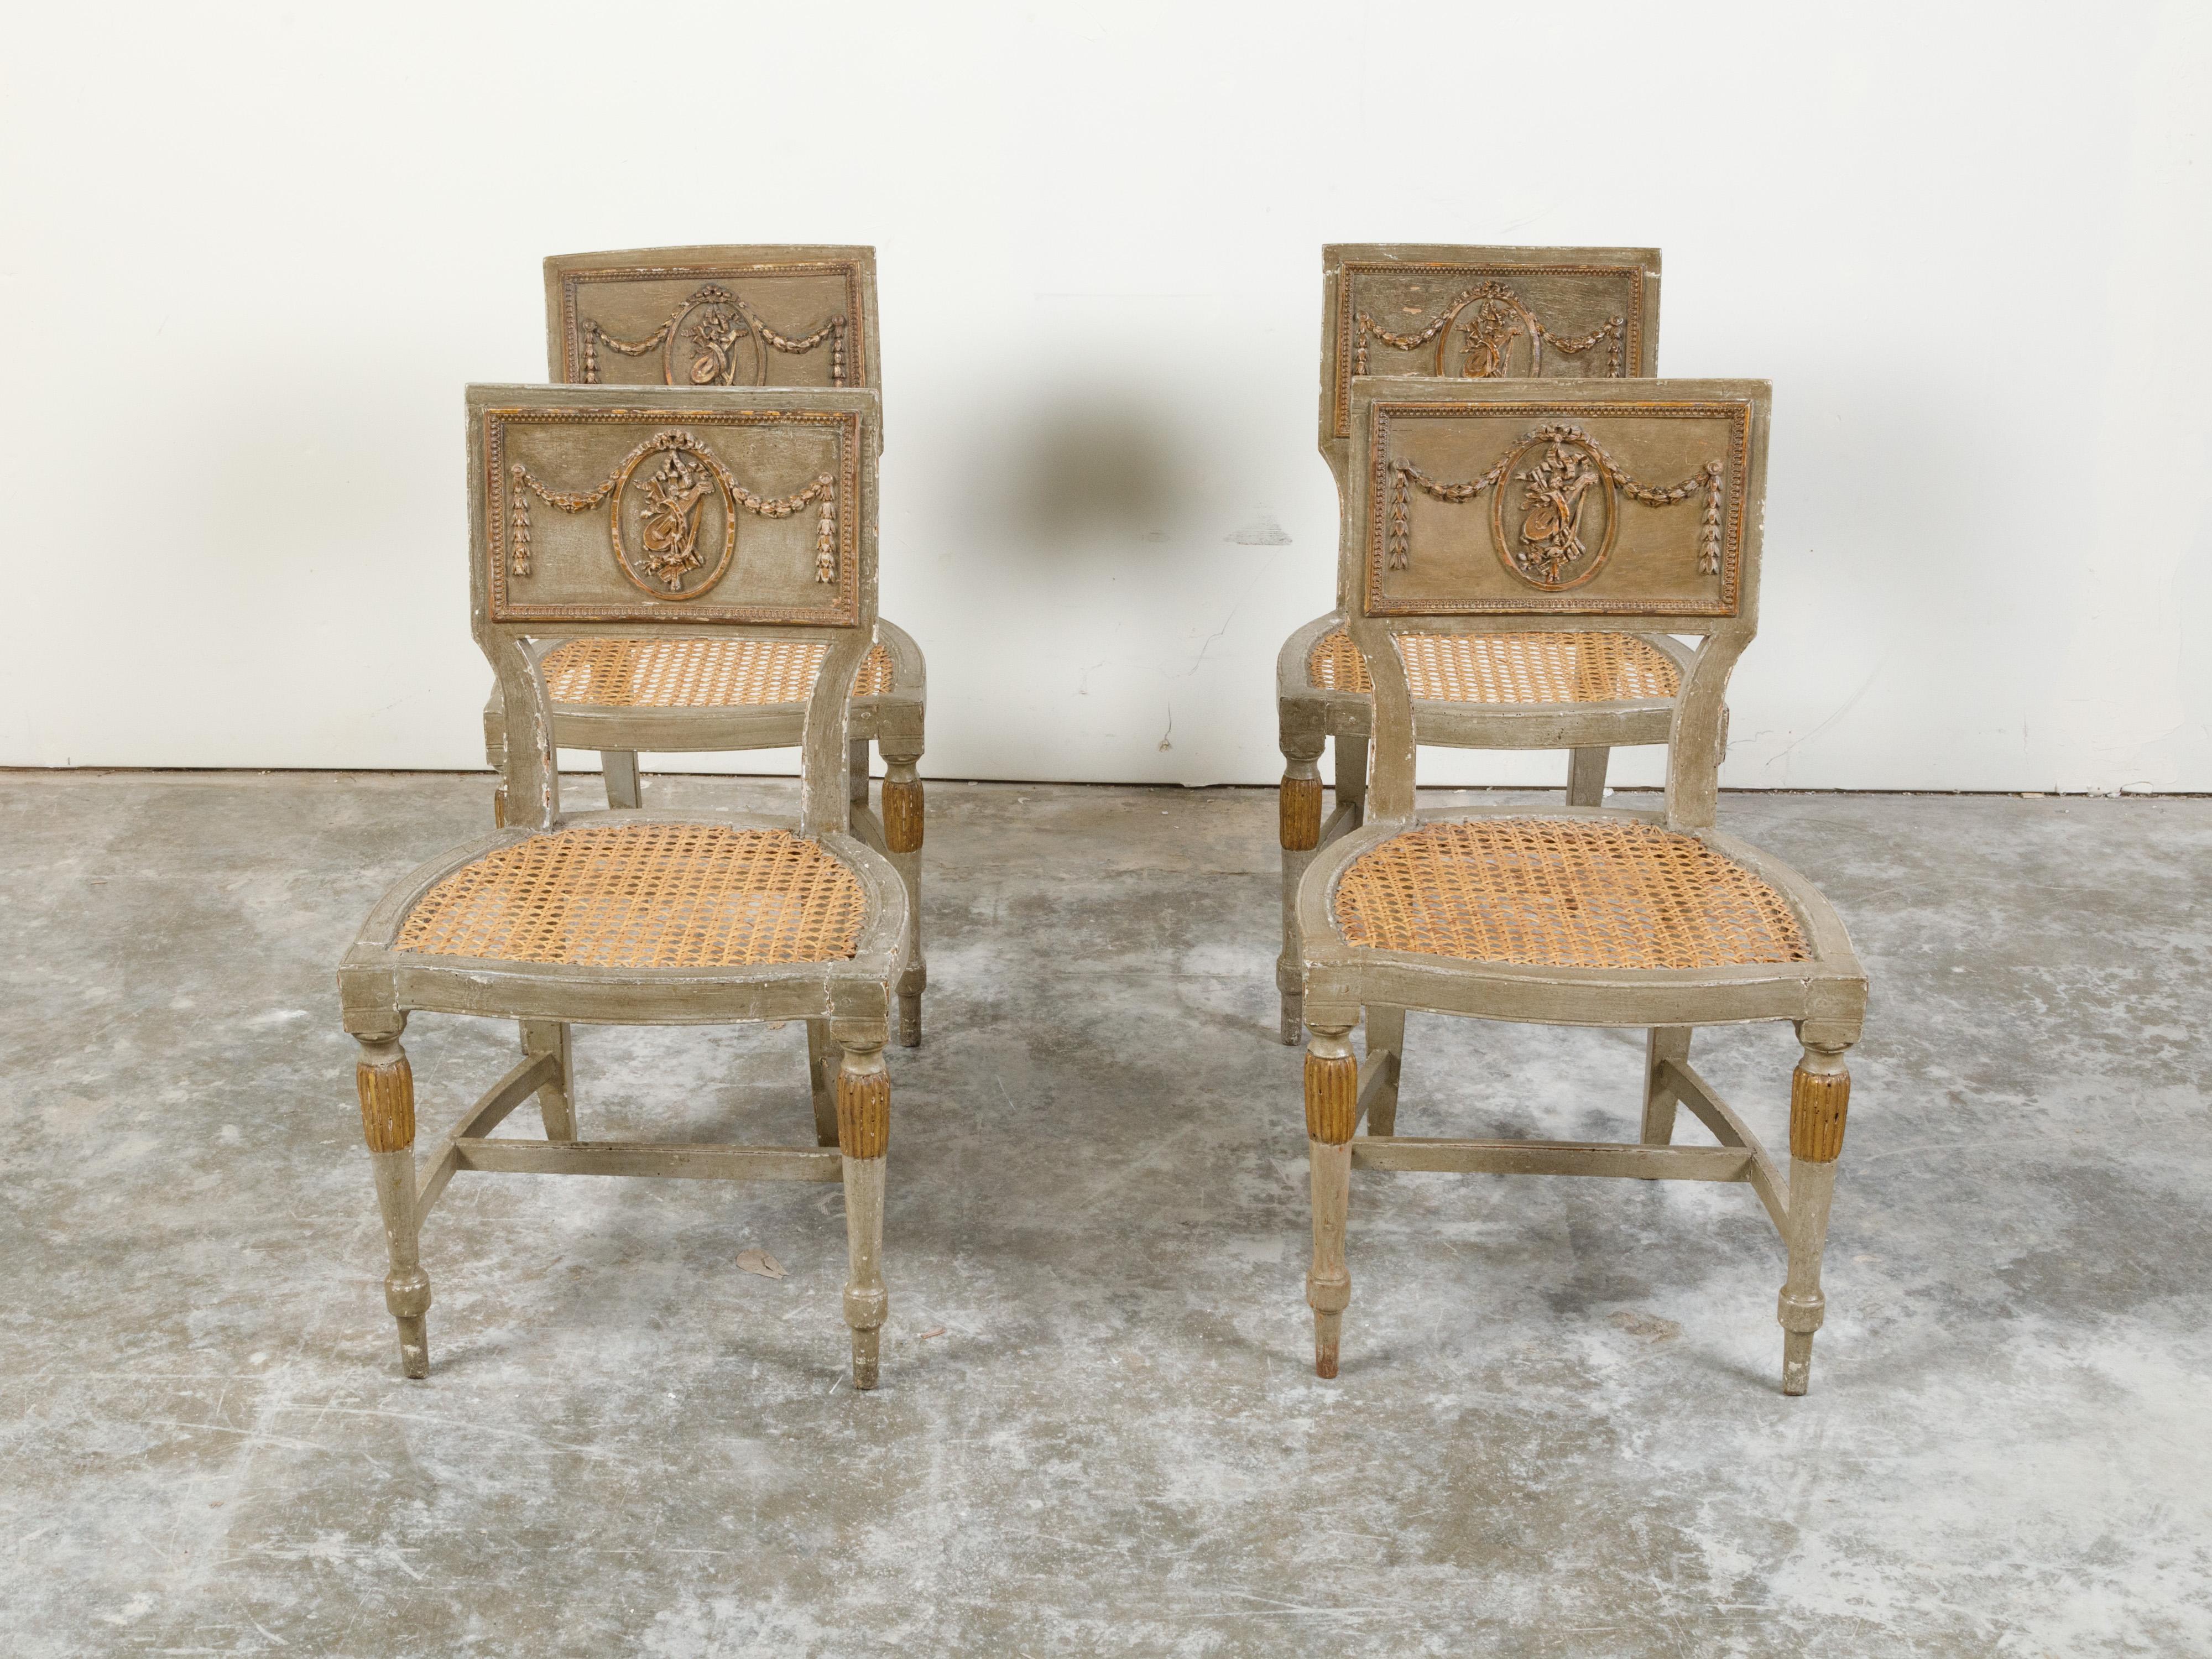 A set of four French painted wood side chairs from the 18th century, with carved Liberal Arts allegory. Created in France during the 18th century, each of this set of four side chairs features a rectangular slightly curved back adorned with beads